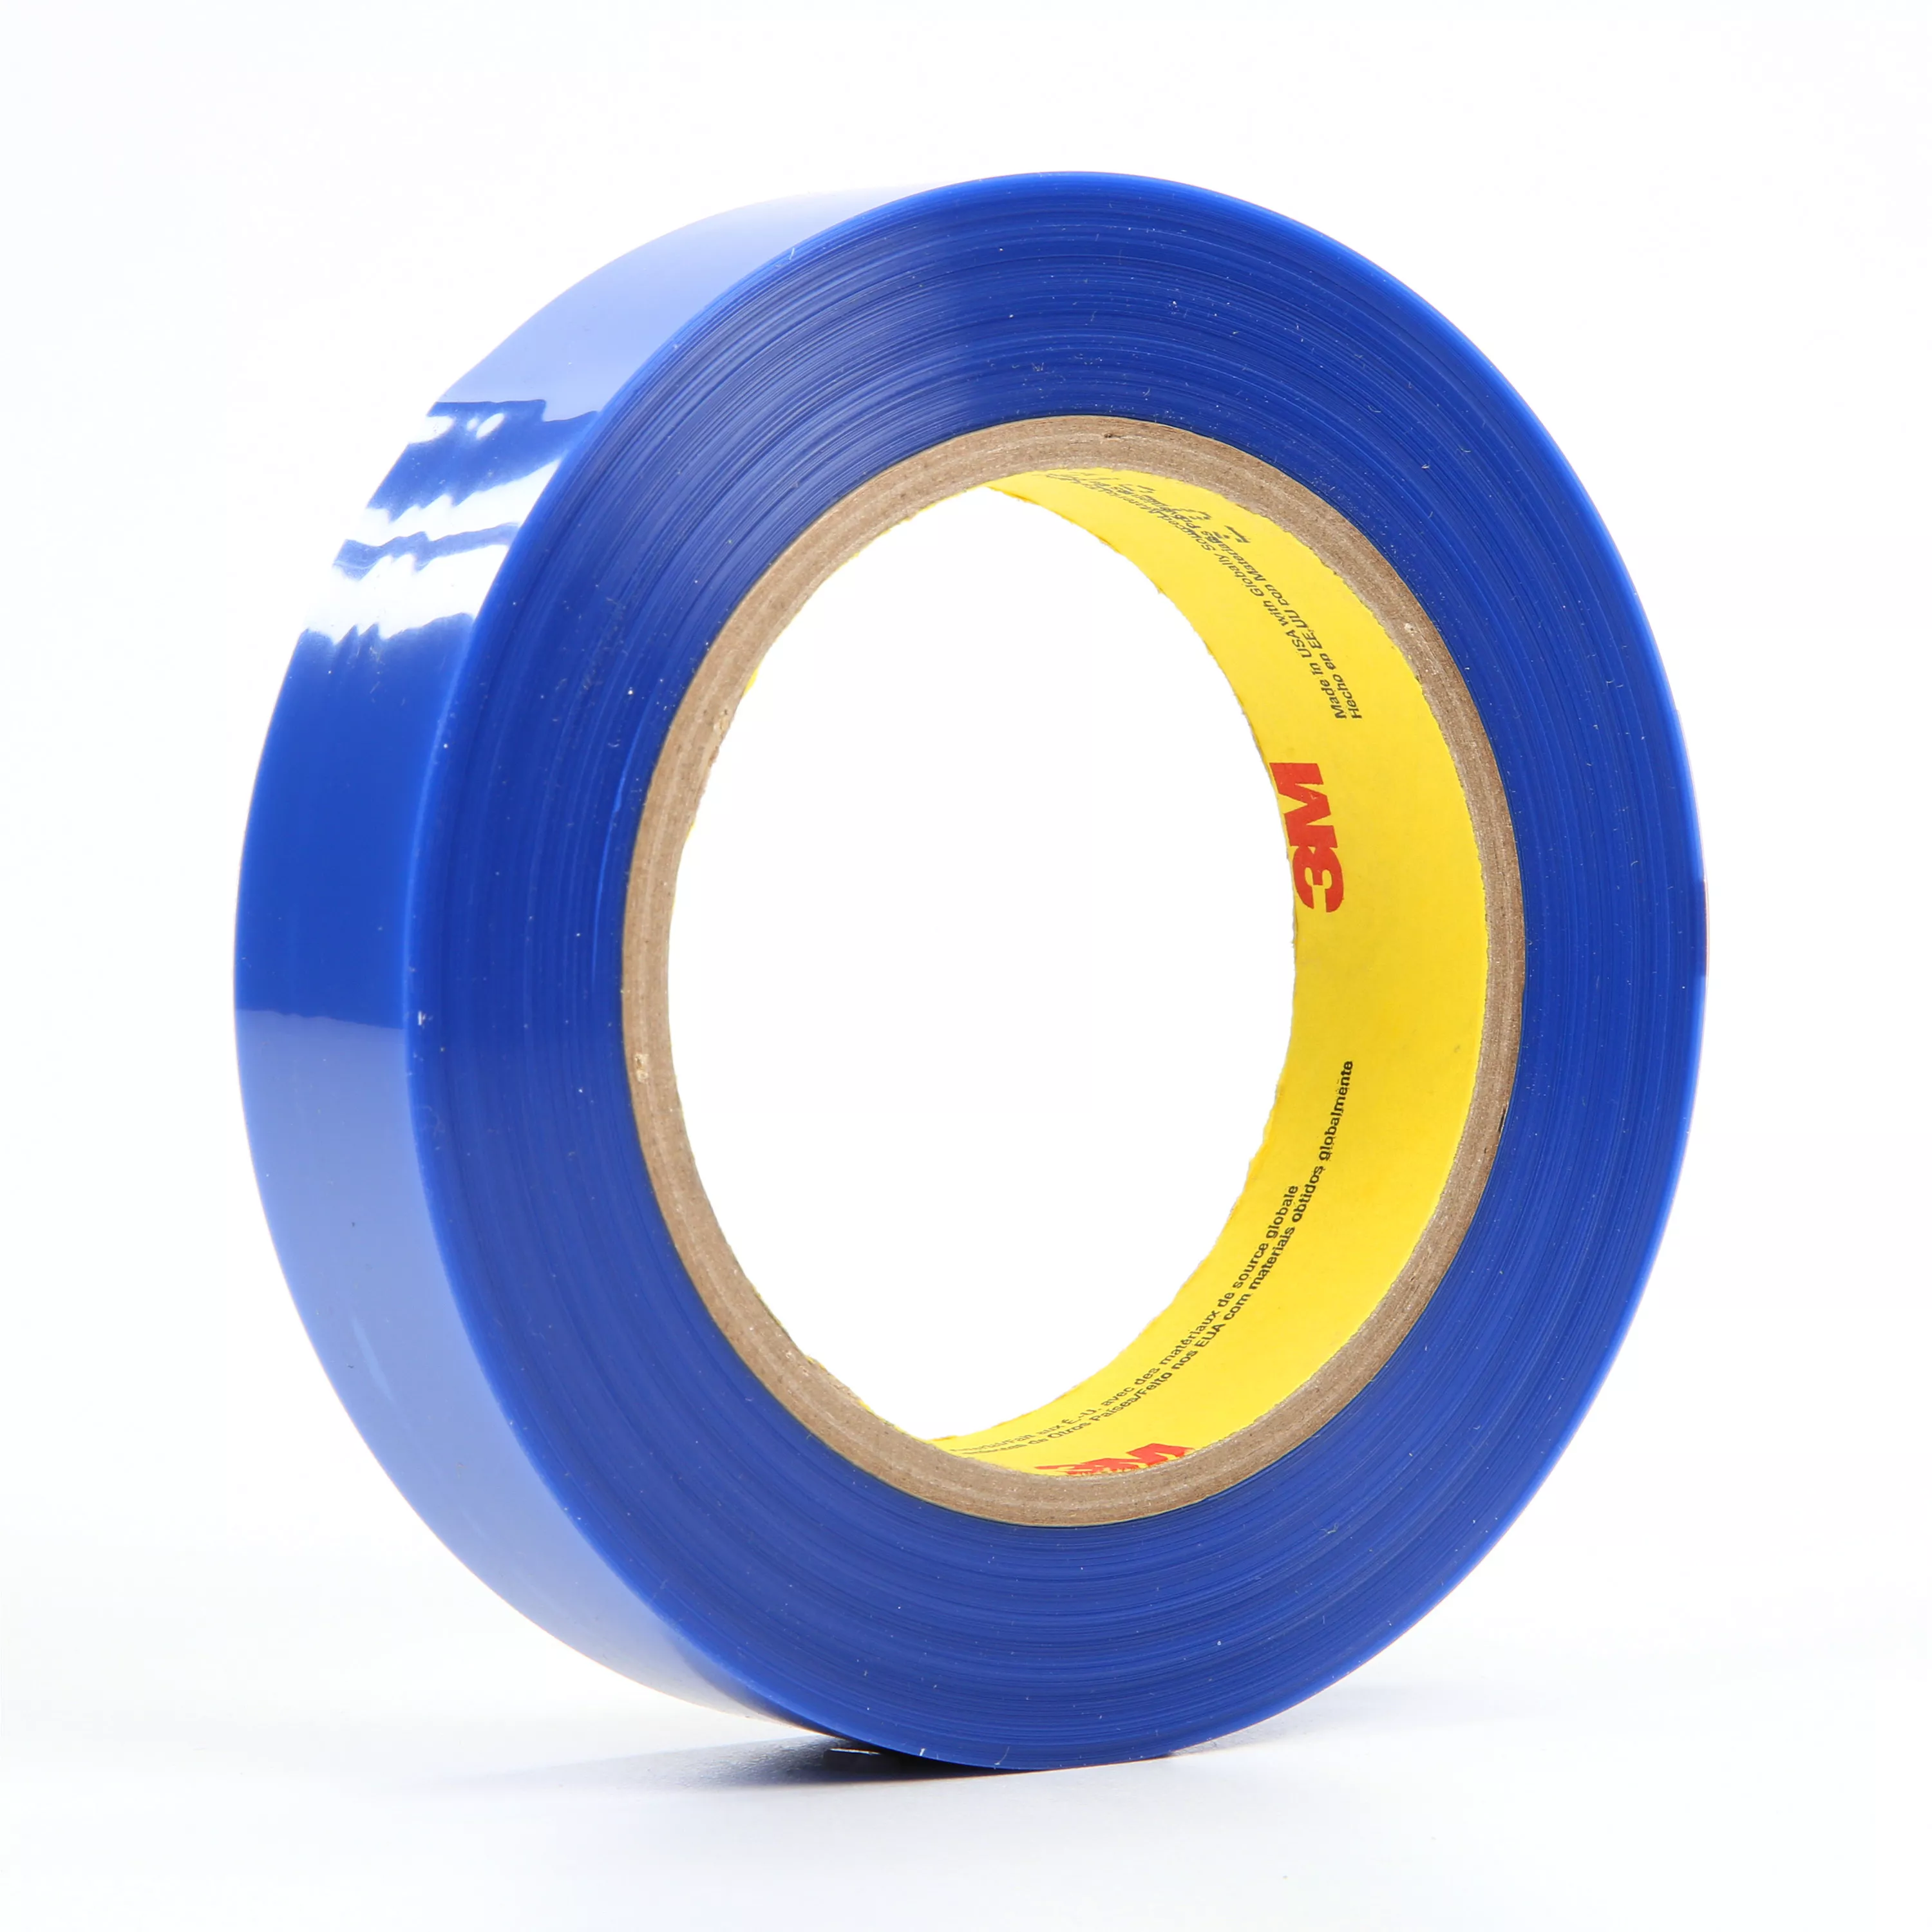 3M™ Polyester Tape 8902, Blue, 1 in x 72 yd, 3.4 mil, 36 Roll/Case